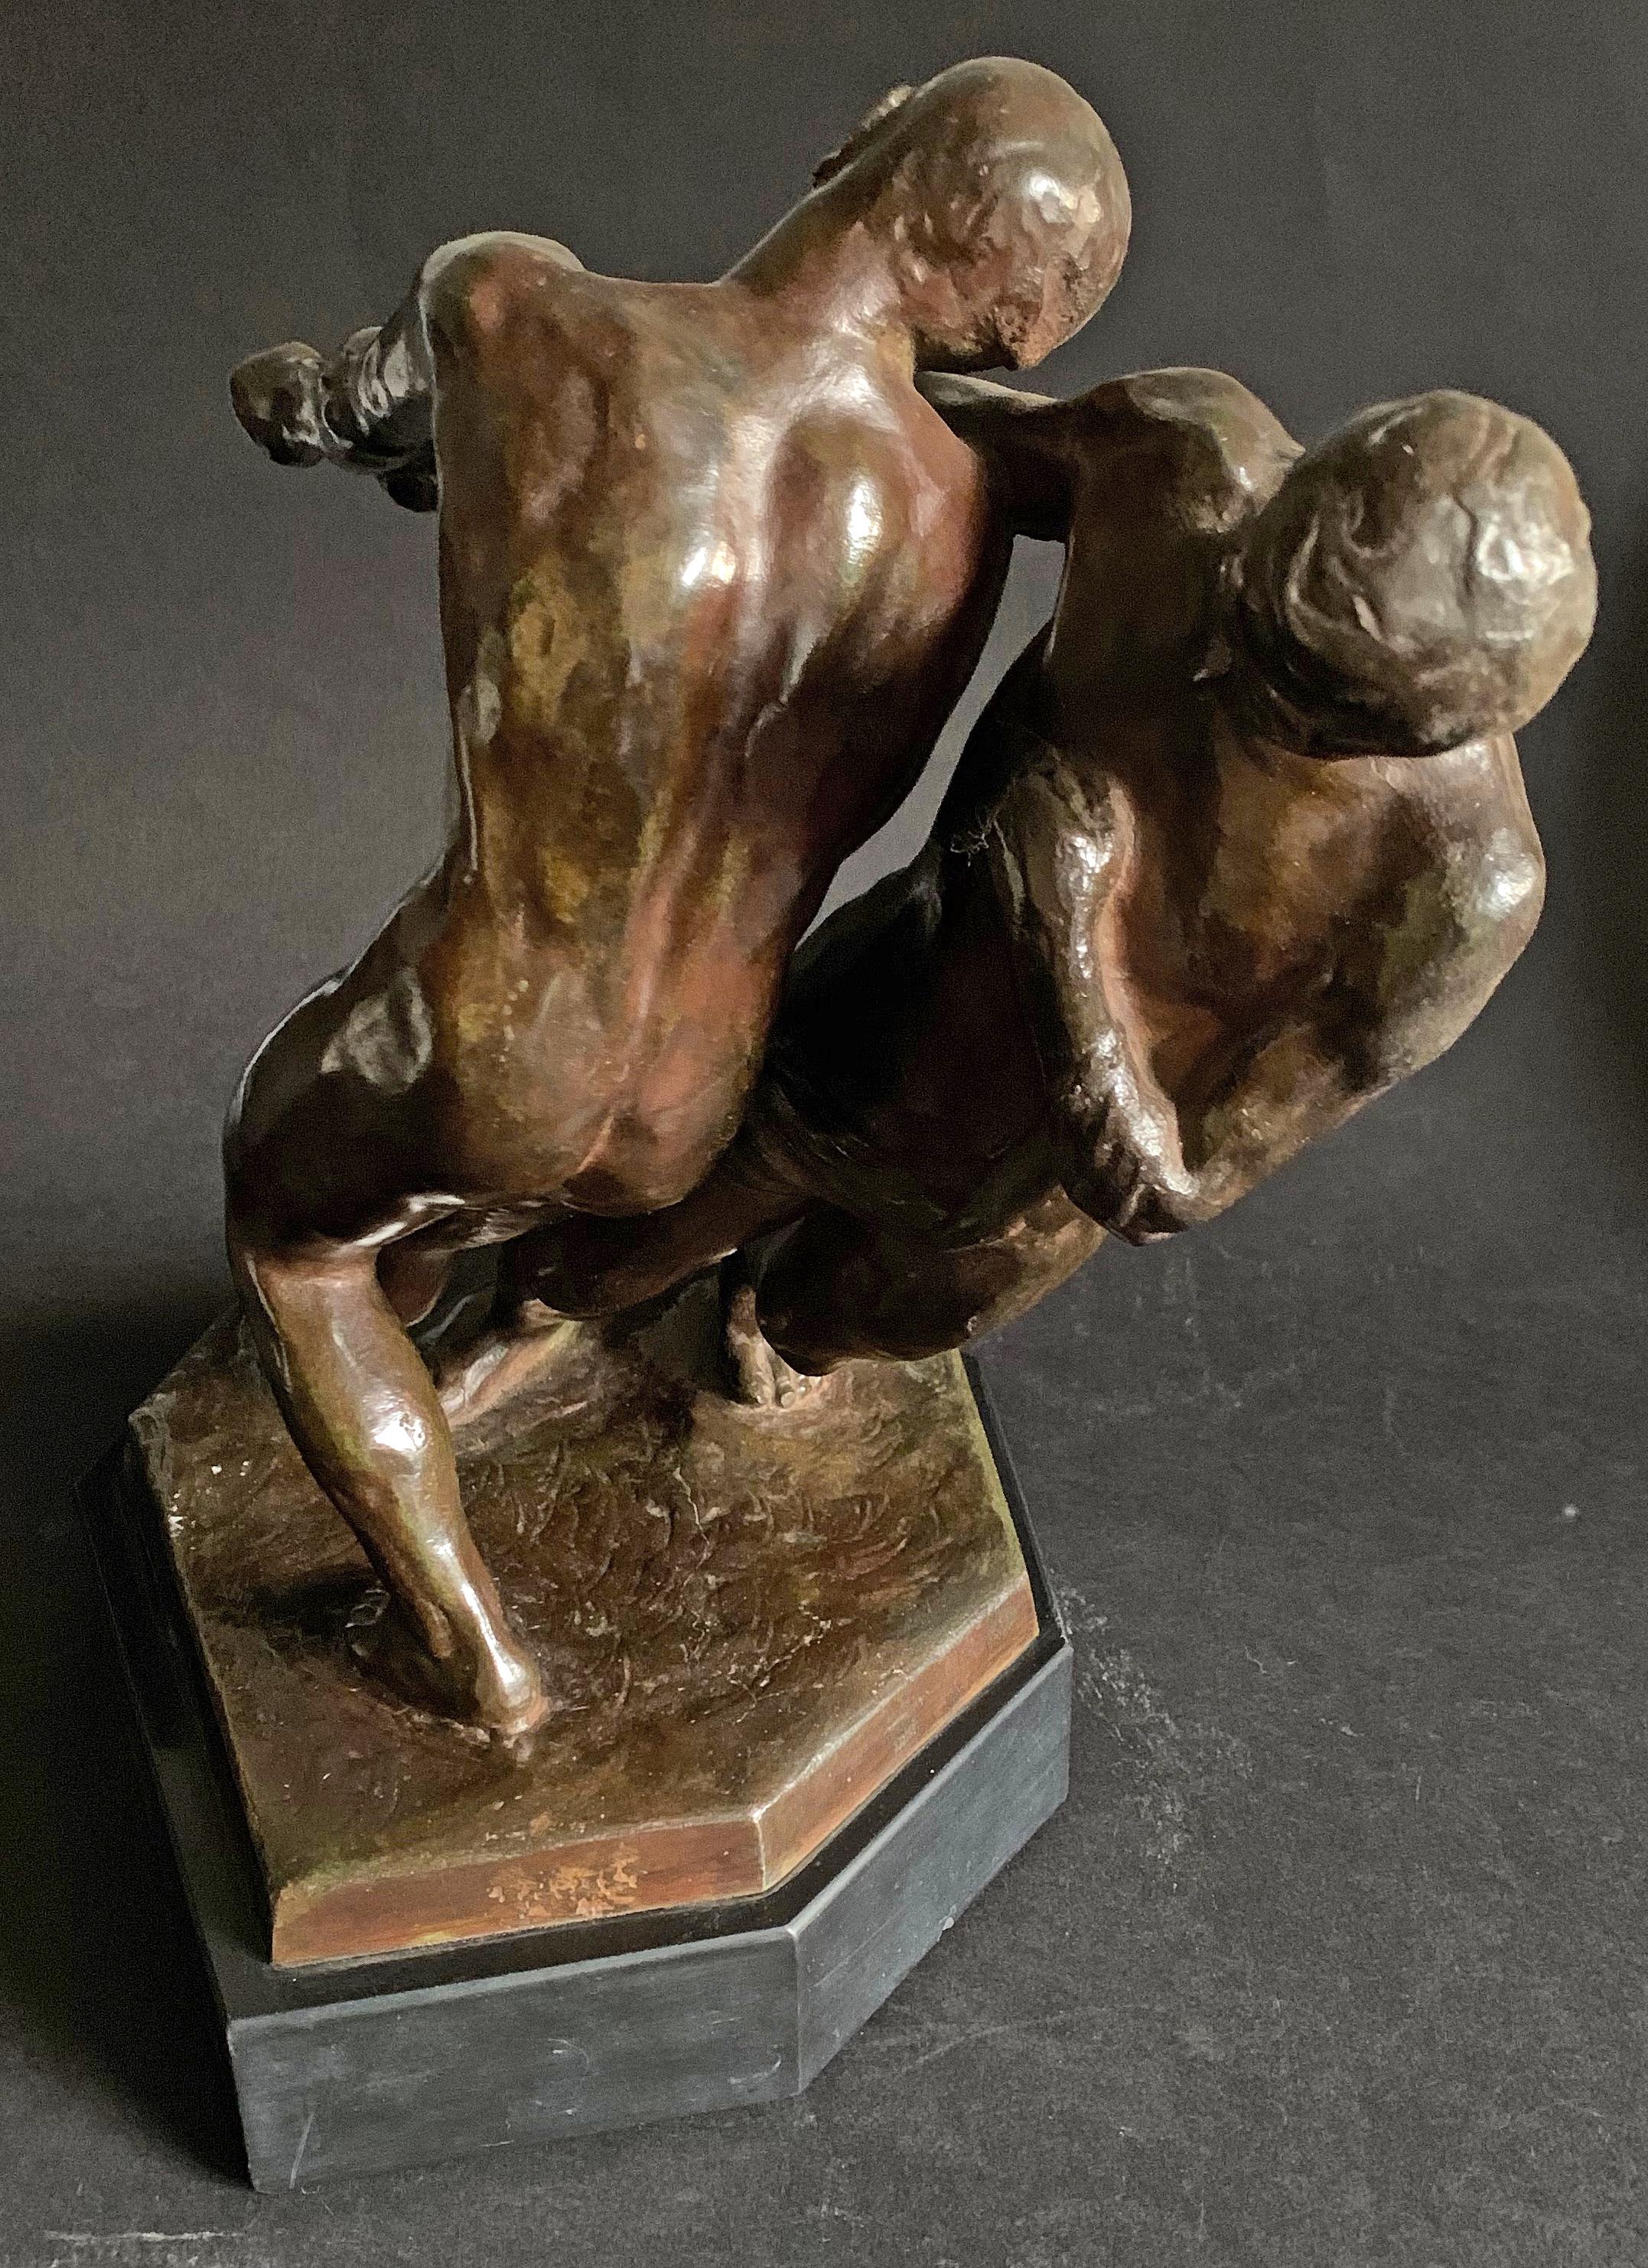 A rare and fascinating sculpture of two nude men hauling in something from a distance, this piece also serves as a fascinating study of the tangled relationship between two figures. They are posed as if they are dancing or wrestling -- in